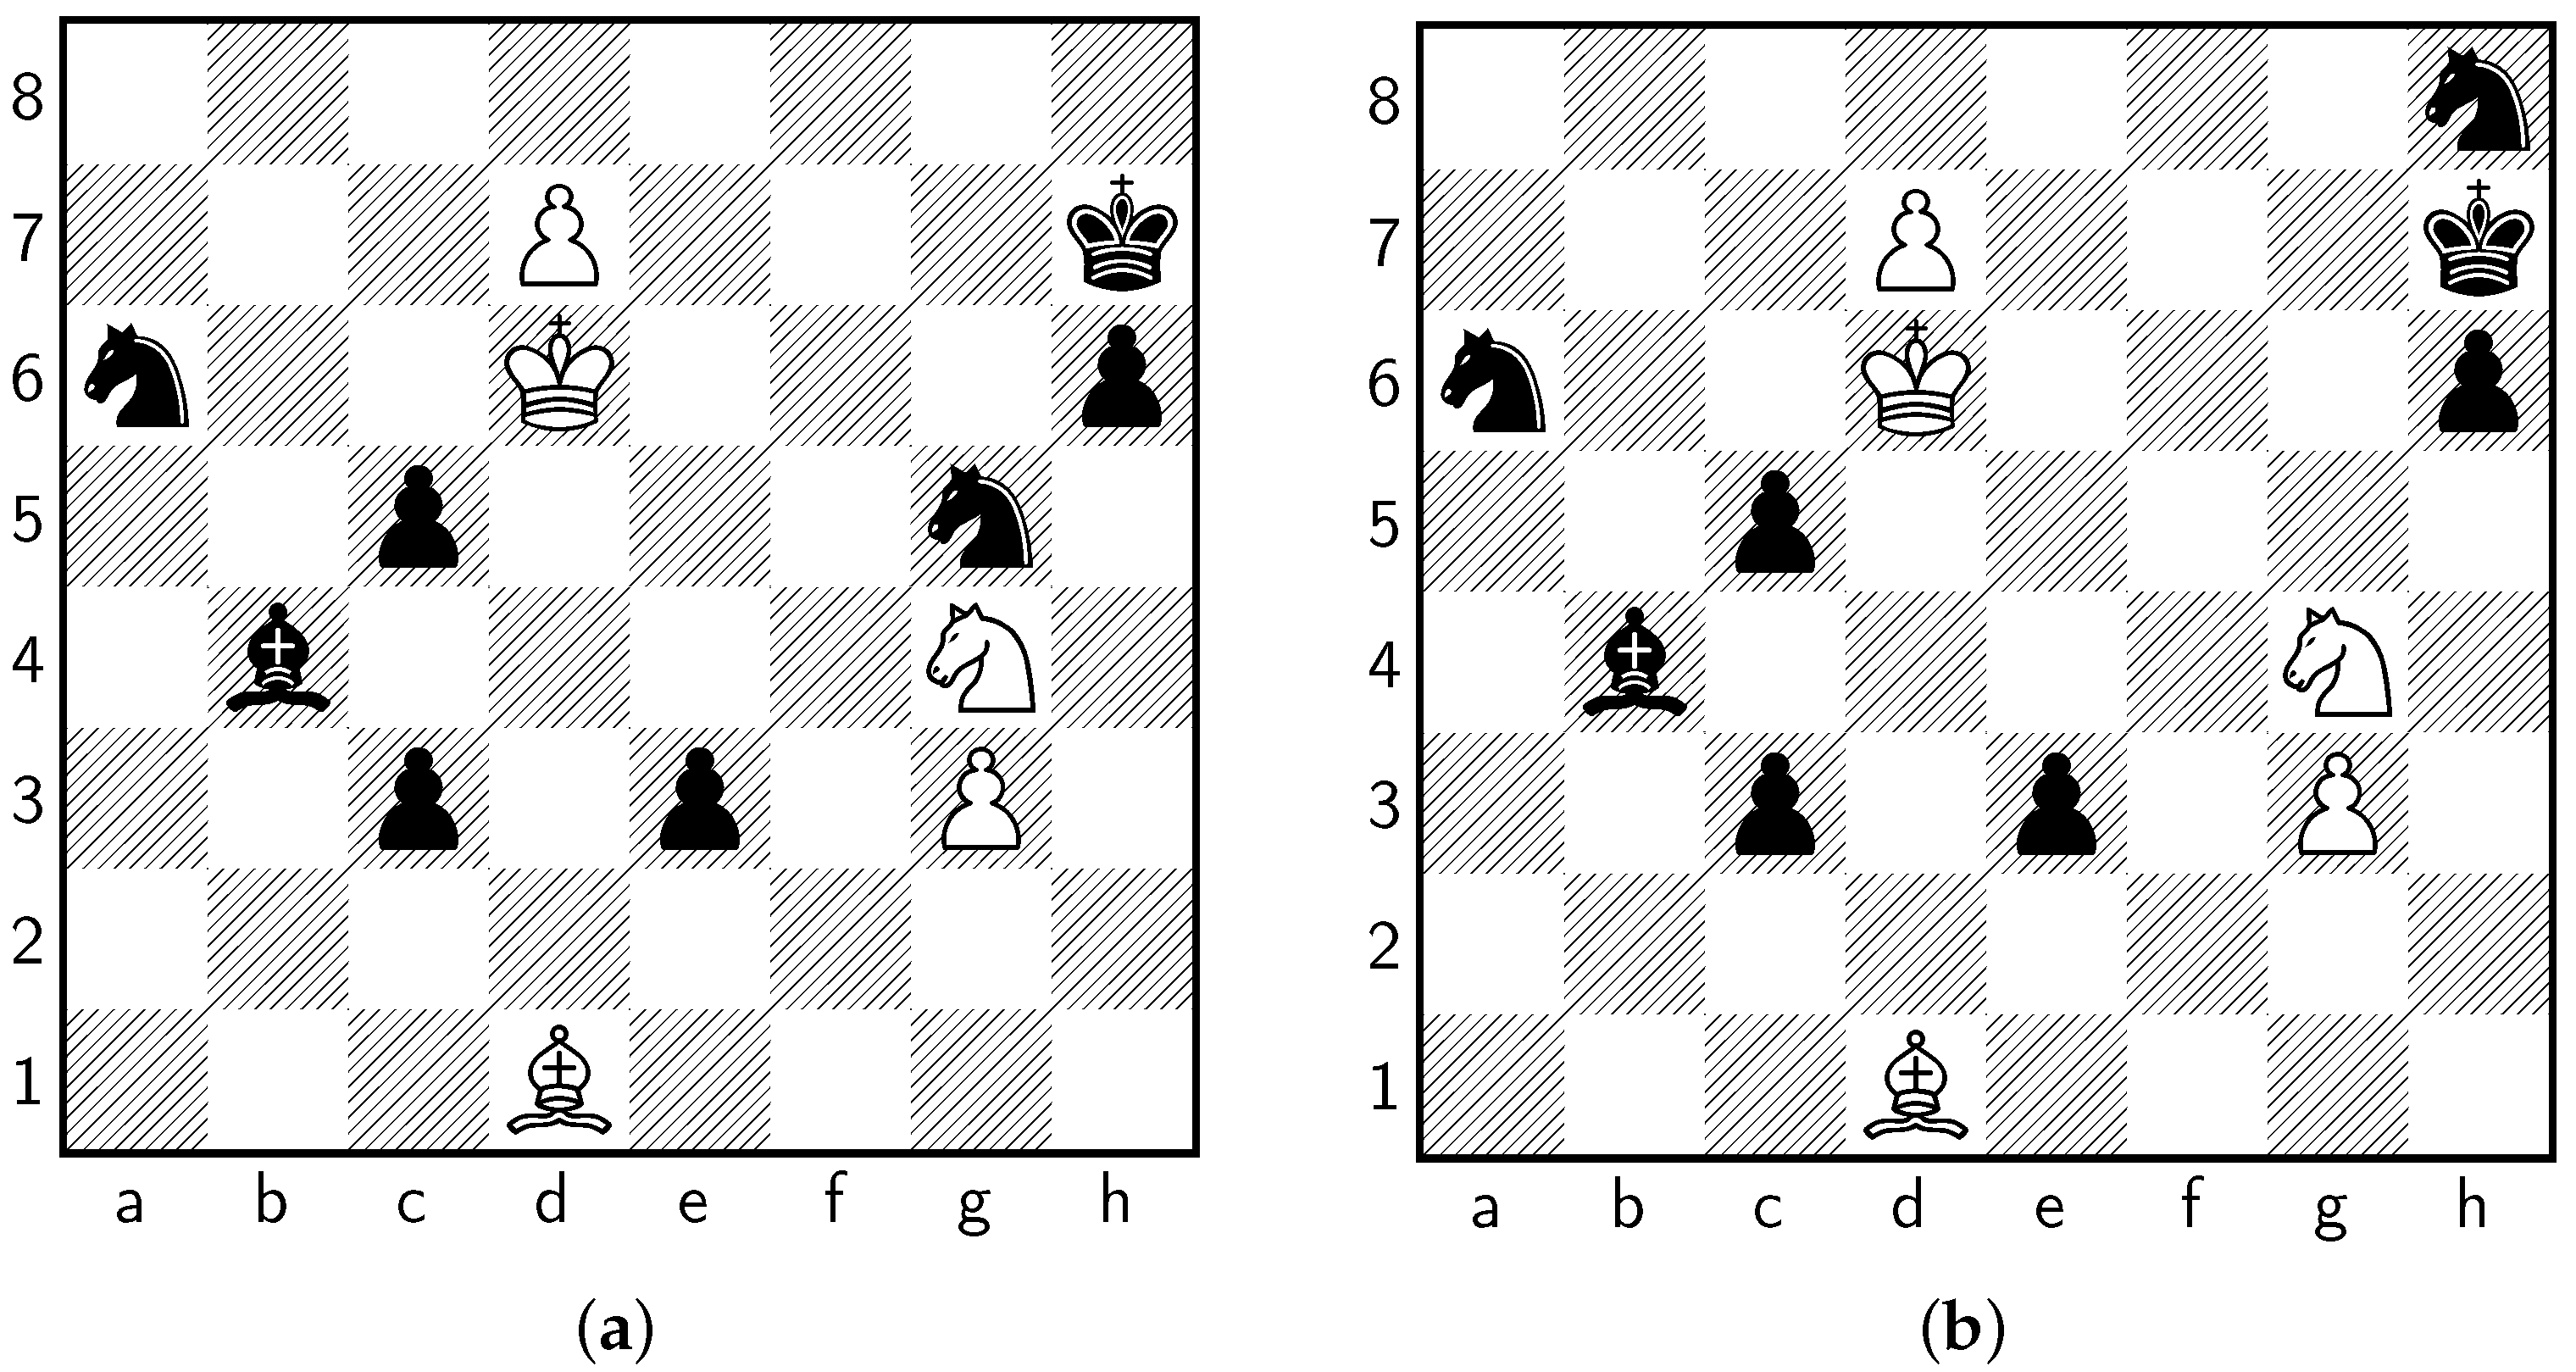 Chess Puzzles Worksheets